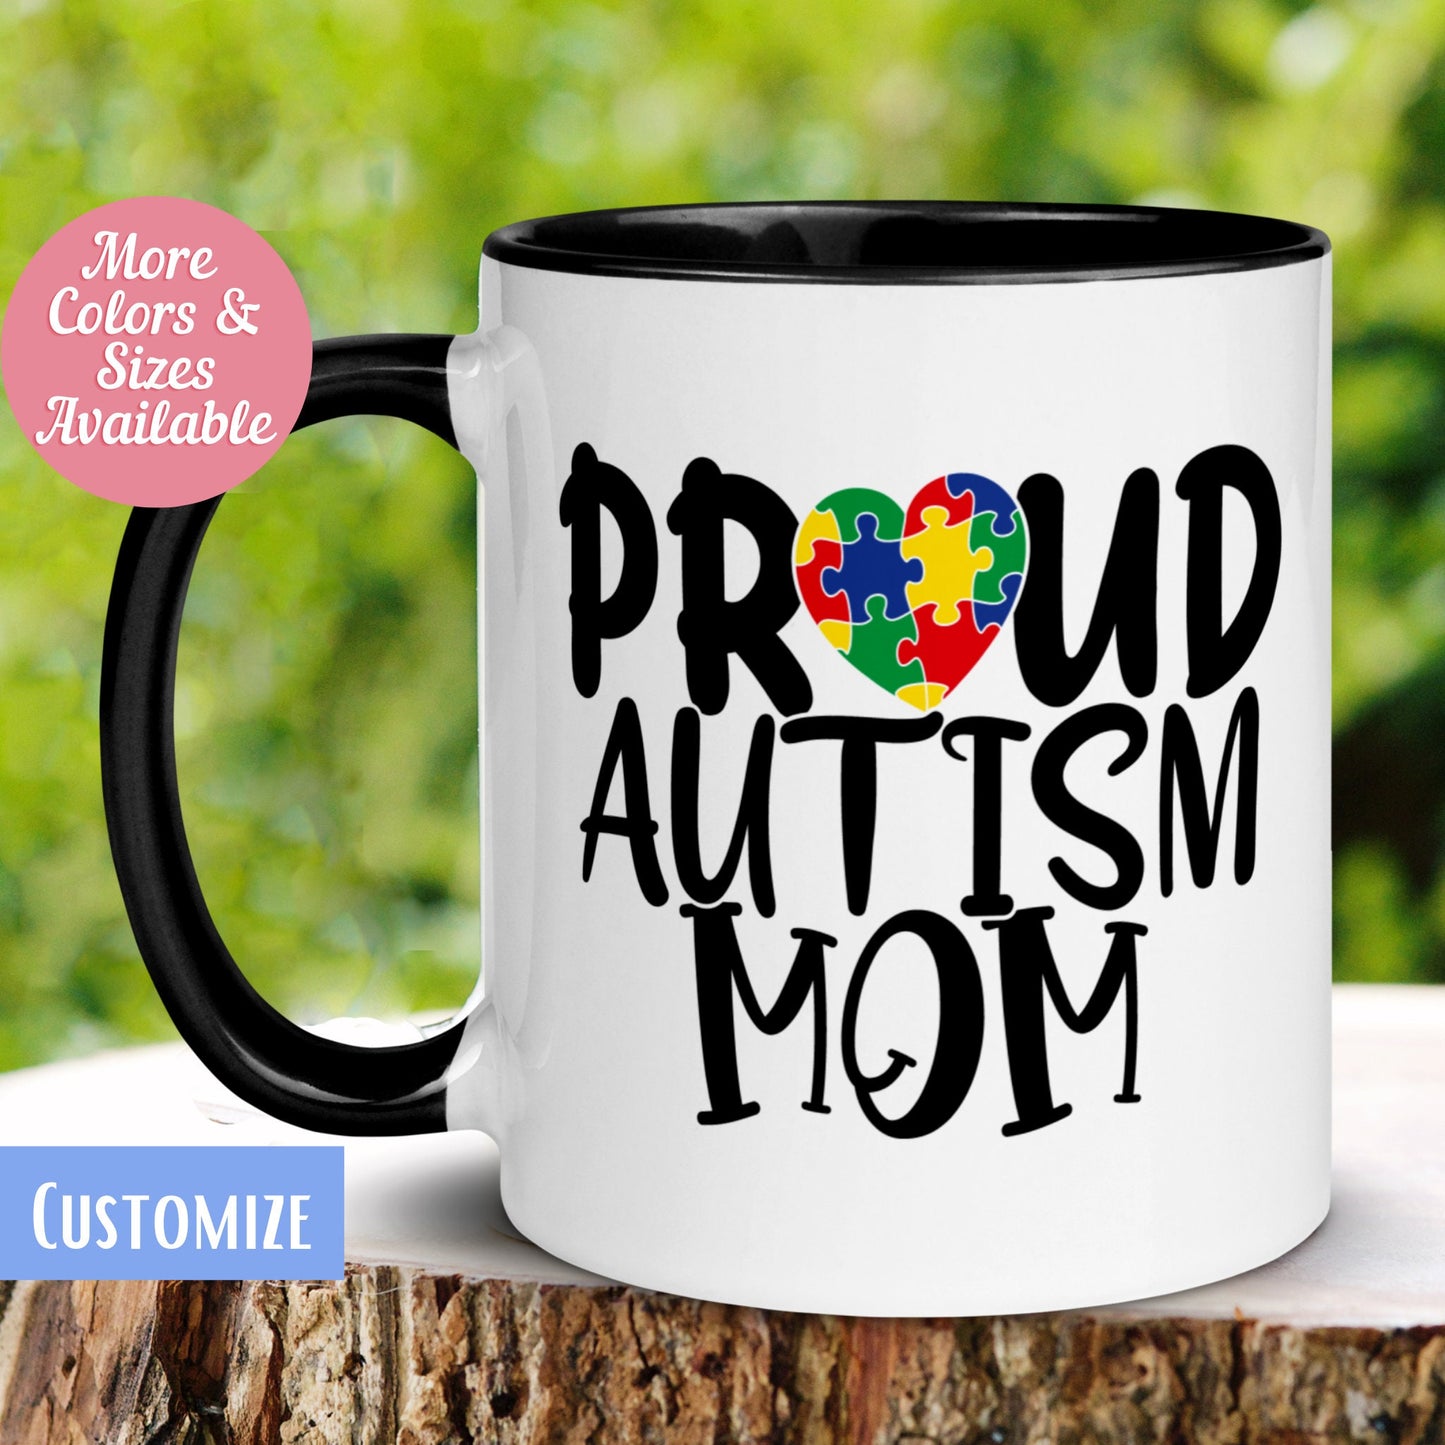 Autism Mug, Proud Autism Mom Mug, Autism Awareness, Tea Coffee Cup, Birthday Gift for Her, Mother's Day Gift, Parent of Autistic Child, 117